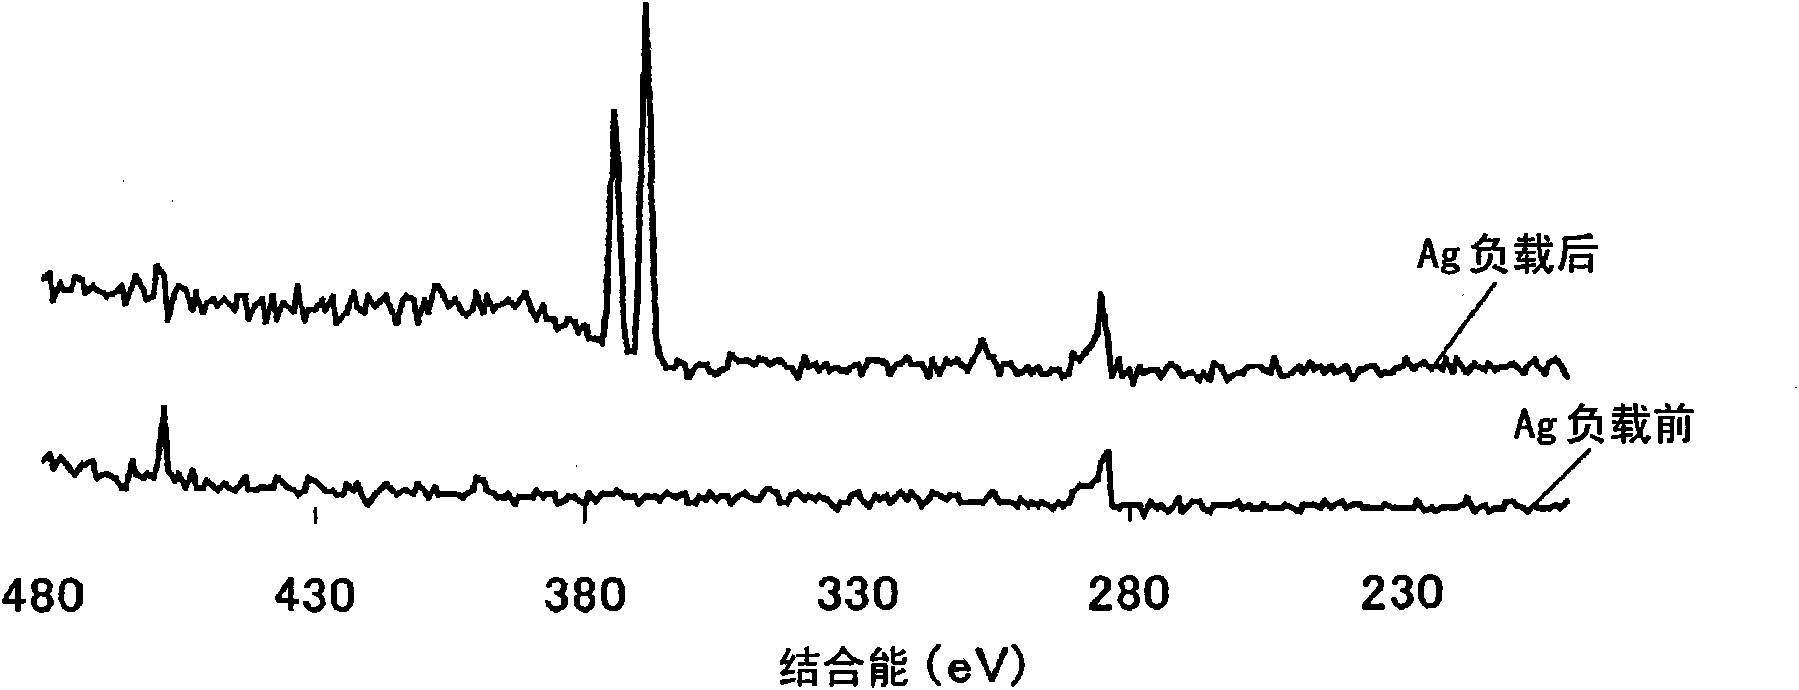 Silver-(titanium oxide)-zeolite adsorbent/decomposing material and process for production thereof